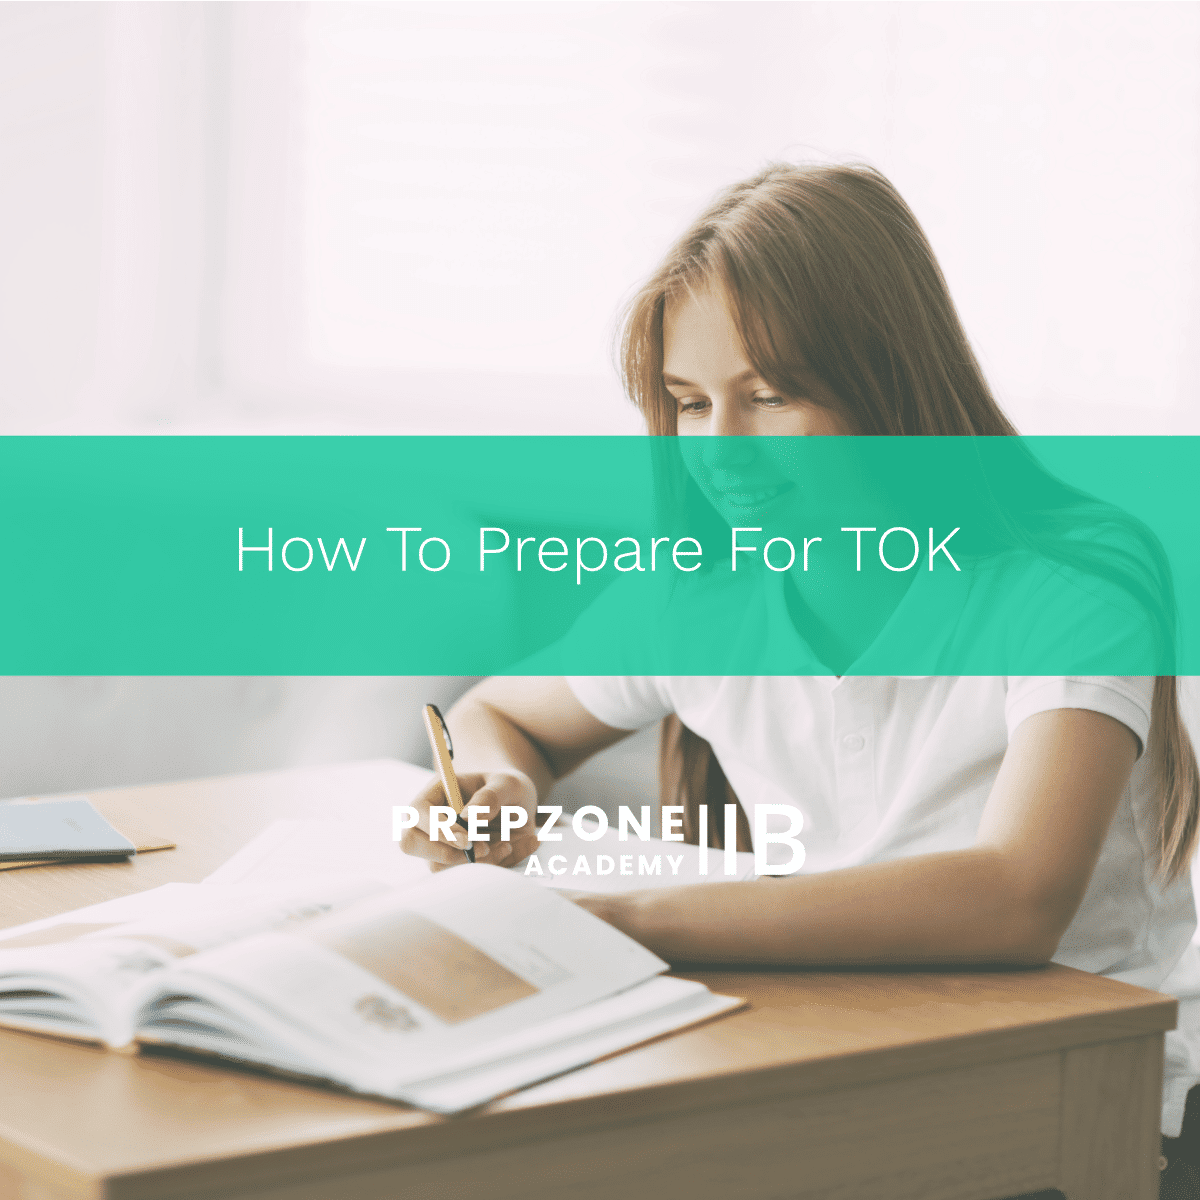 How To Prepare For TOK